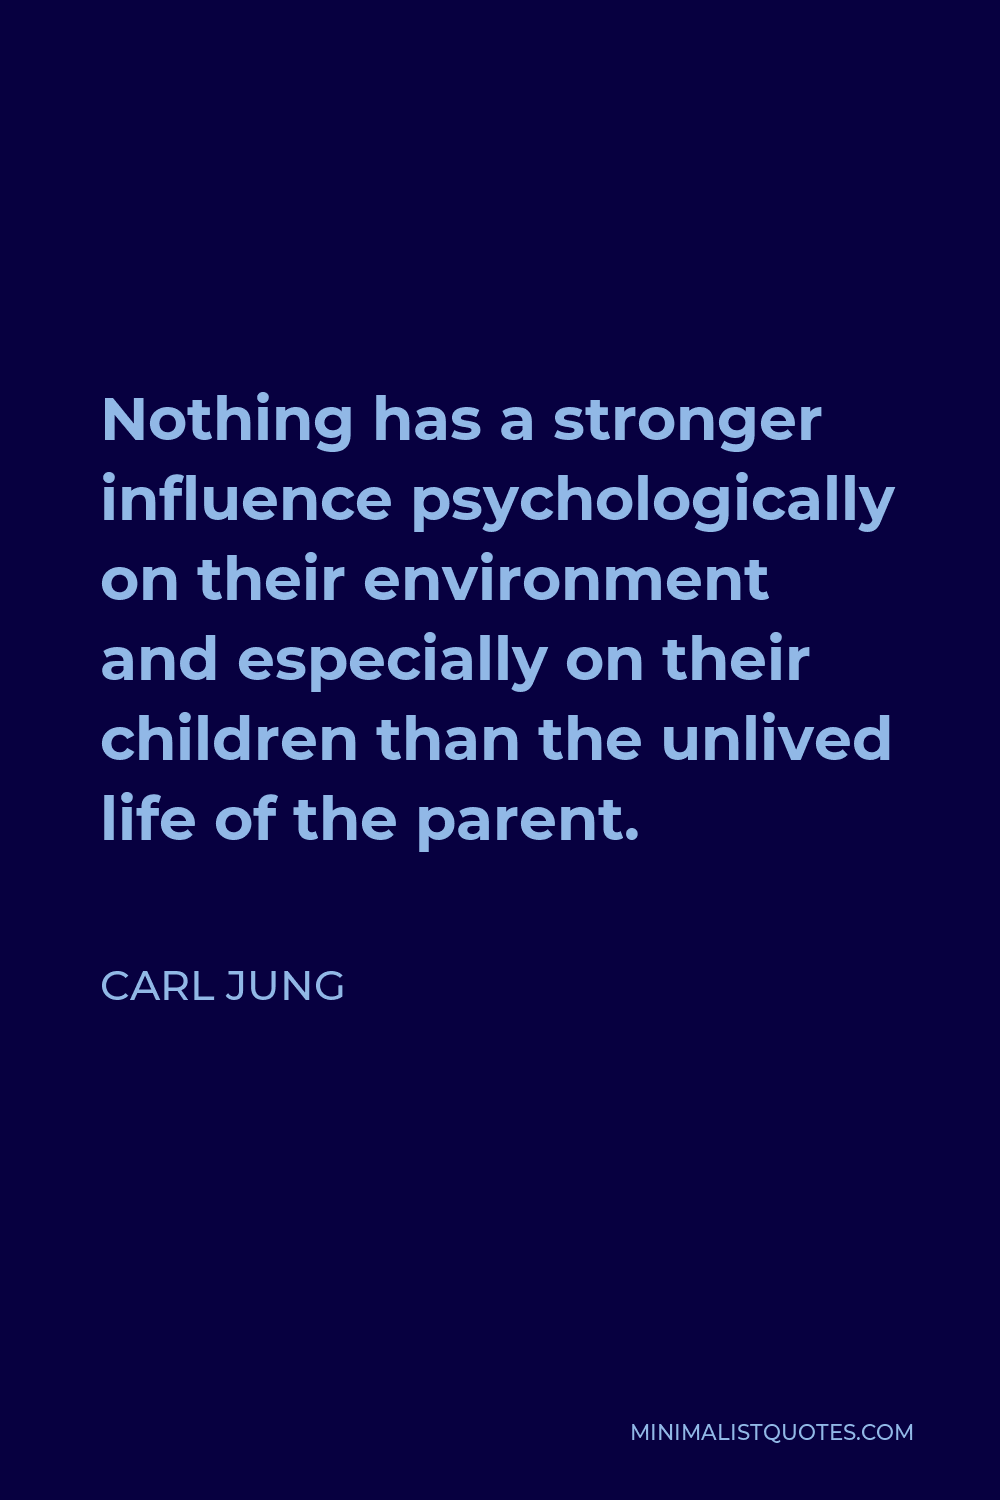 Carl Jung Quote - Nothing has a stronger influence psychologically on their environment and especially on their children than the unlived life of the parent.